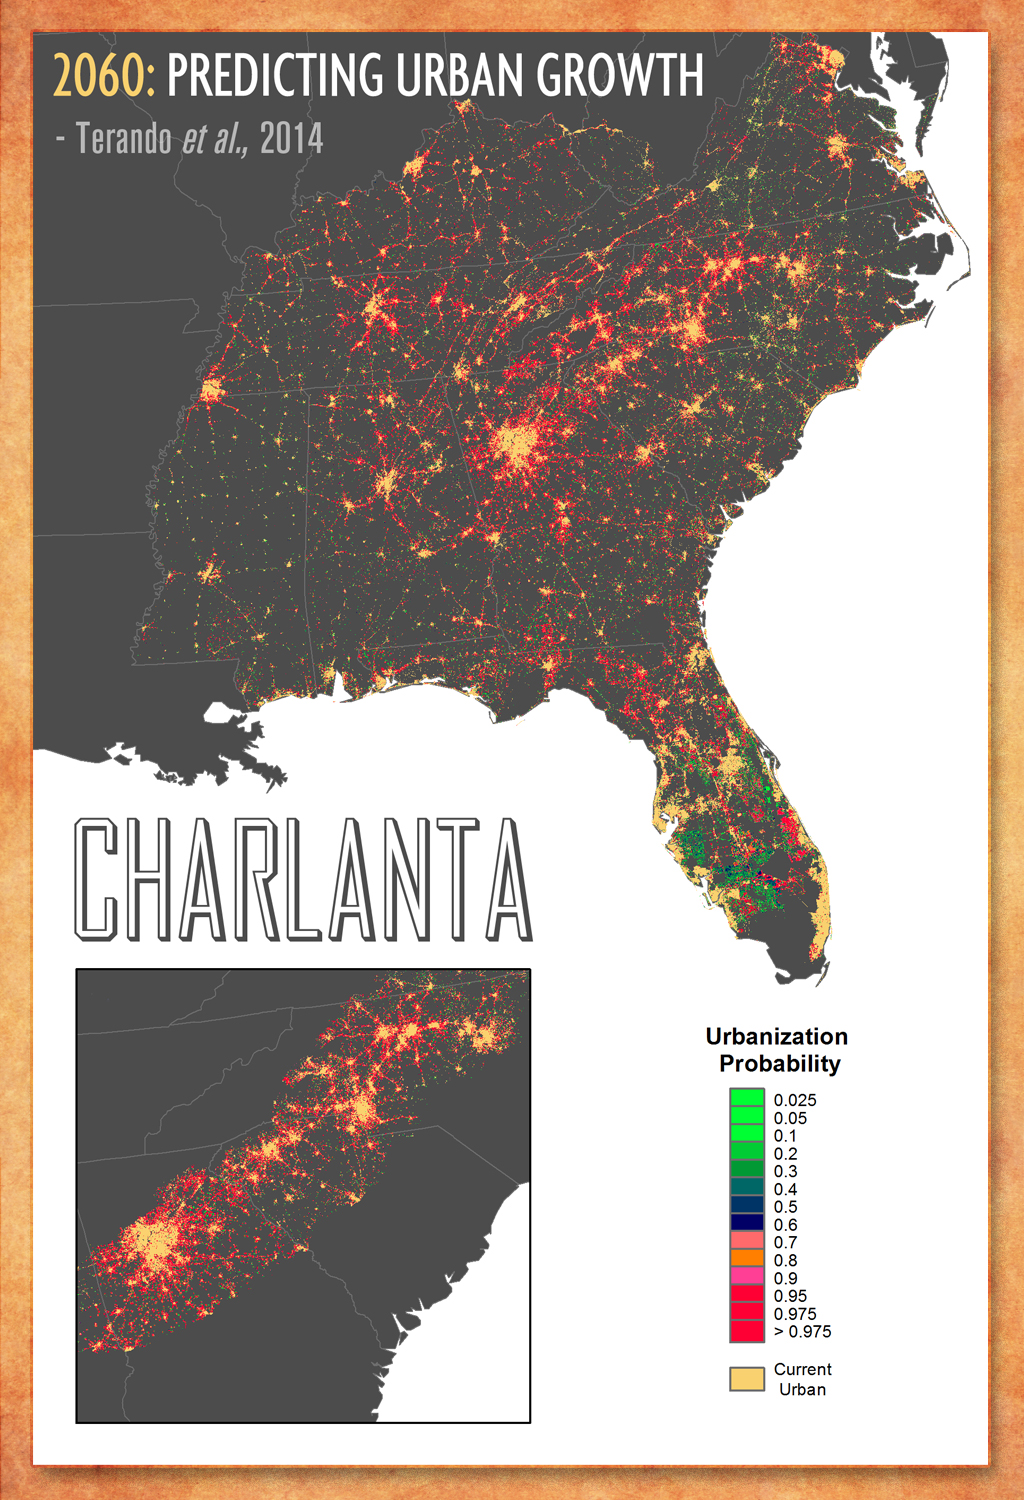 Map of 2060 urban growth projections for the Southeast shows potential megacity called 